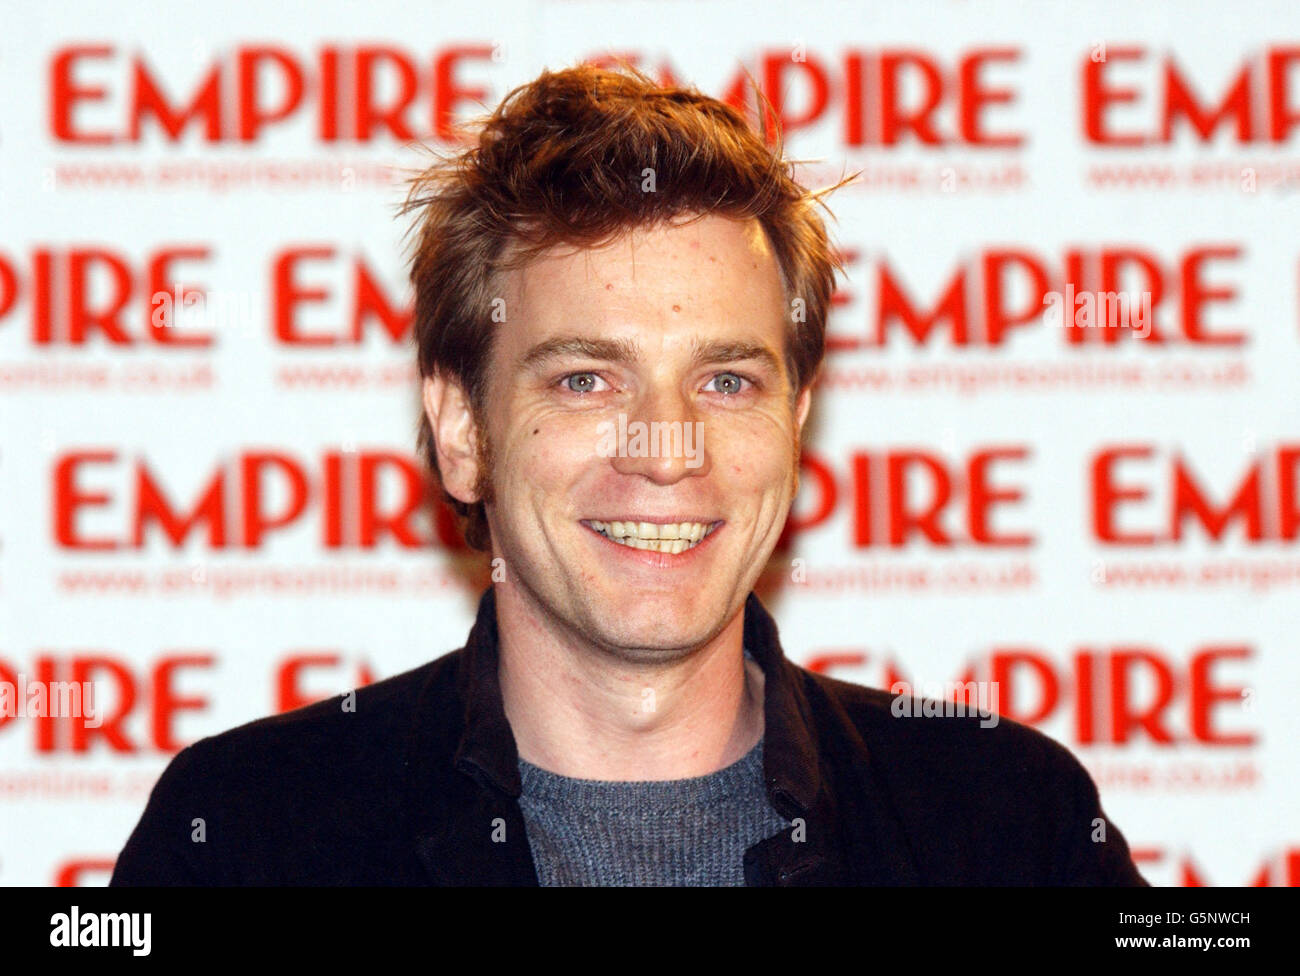 Actor Ewan Mcgregor at the Empire Film Awards at the Dorchester Hotel in London. 07/04/02: The actor has admitted for the first time what audiences and critics around the world quickly grasped about Star Wars prequel The Phantom Menace - it was a dud. * McGregor played the young Obi Wan Kenobi in Star Wars: Episode I - The Phantom Menace, which failed to impress even dedicated followers of the blockbuster series. It did not stop it becoming the third most successful movie of all time. In an interview to mark Film Four's British film month, McGregor told www.filmfour.com that the forthcoming Stock Photo